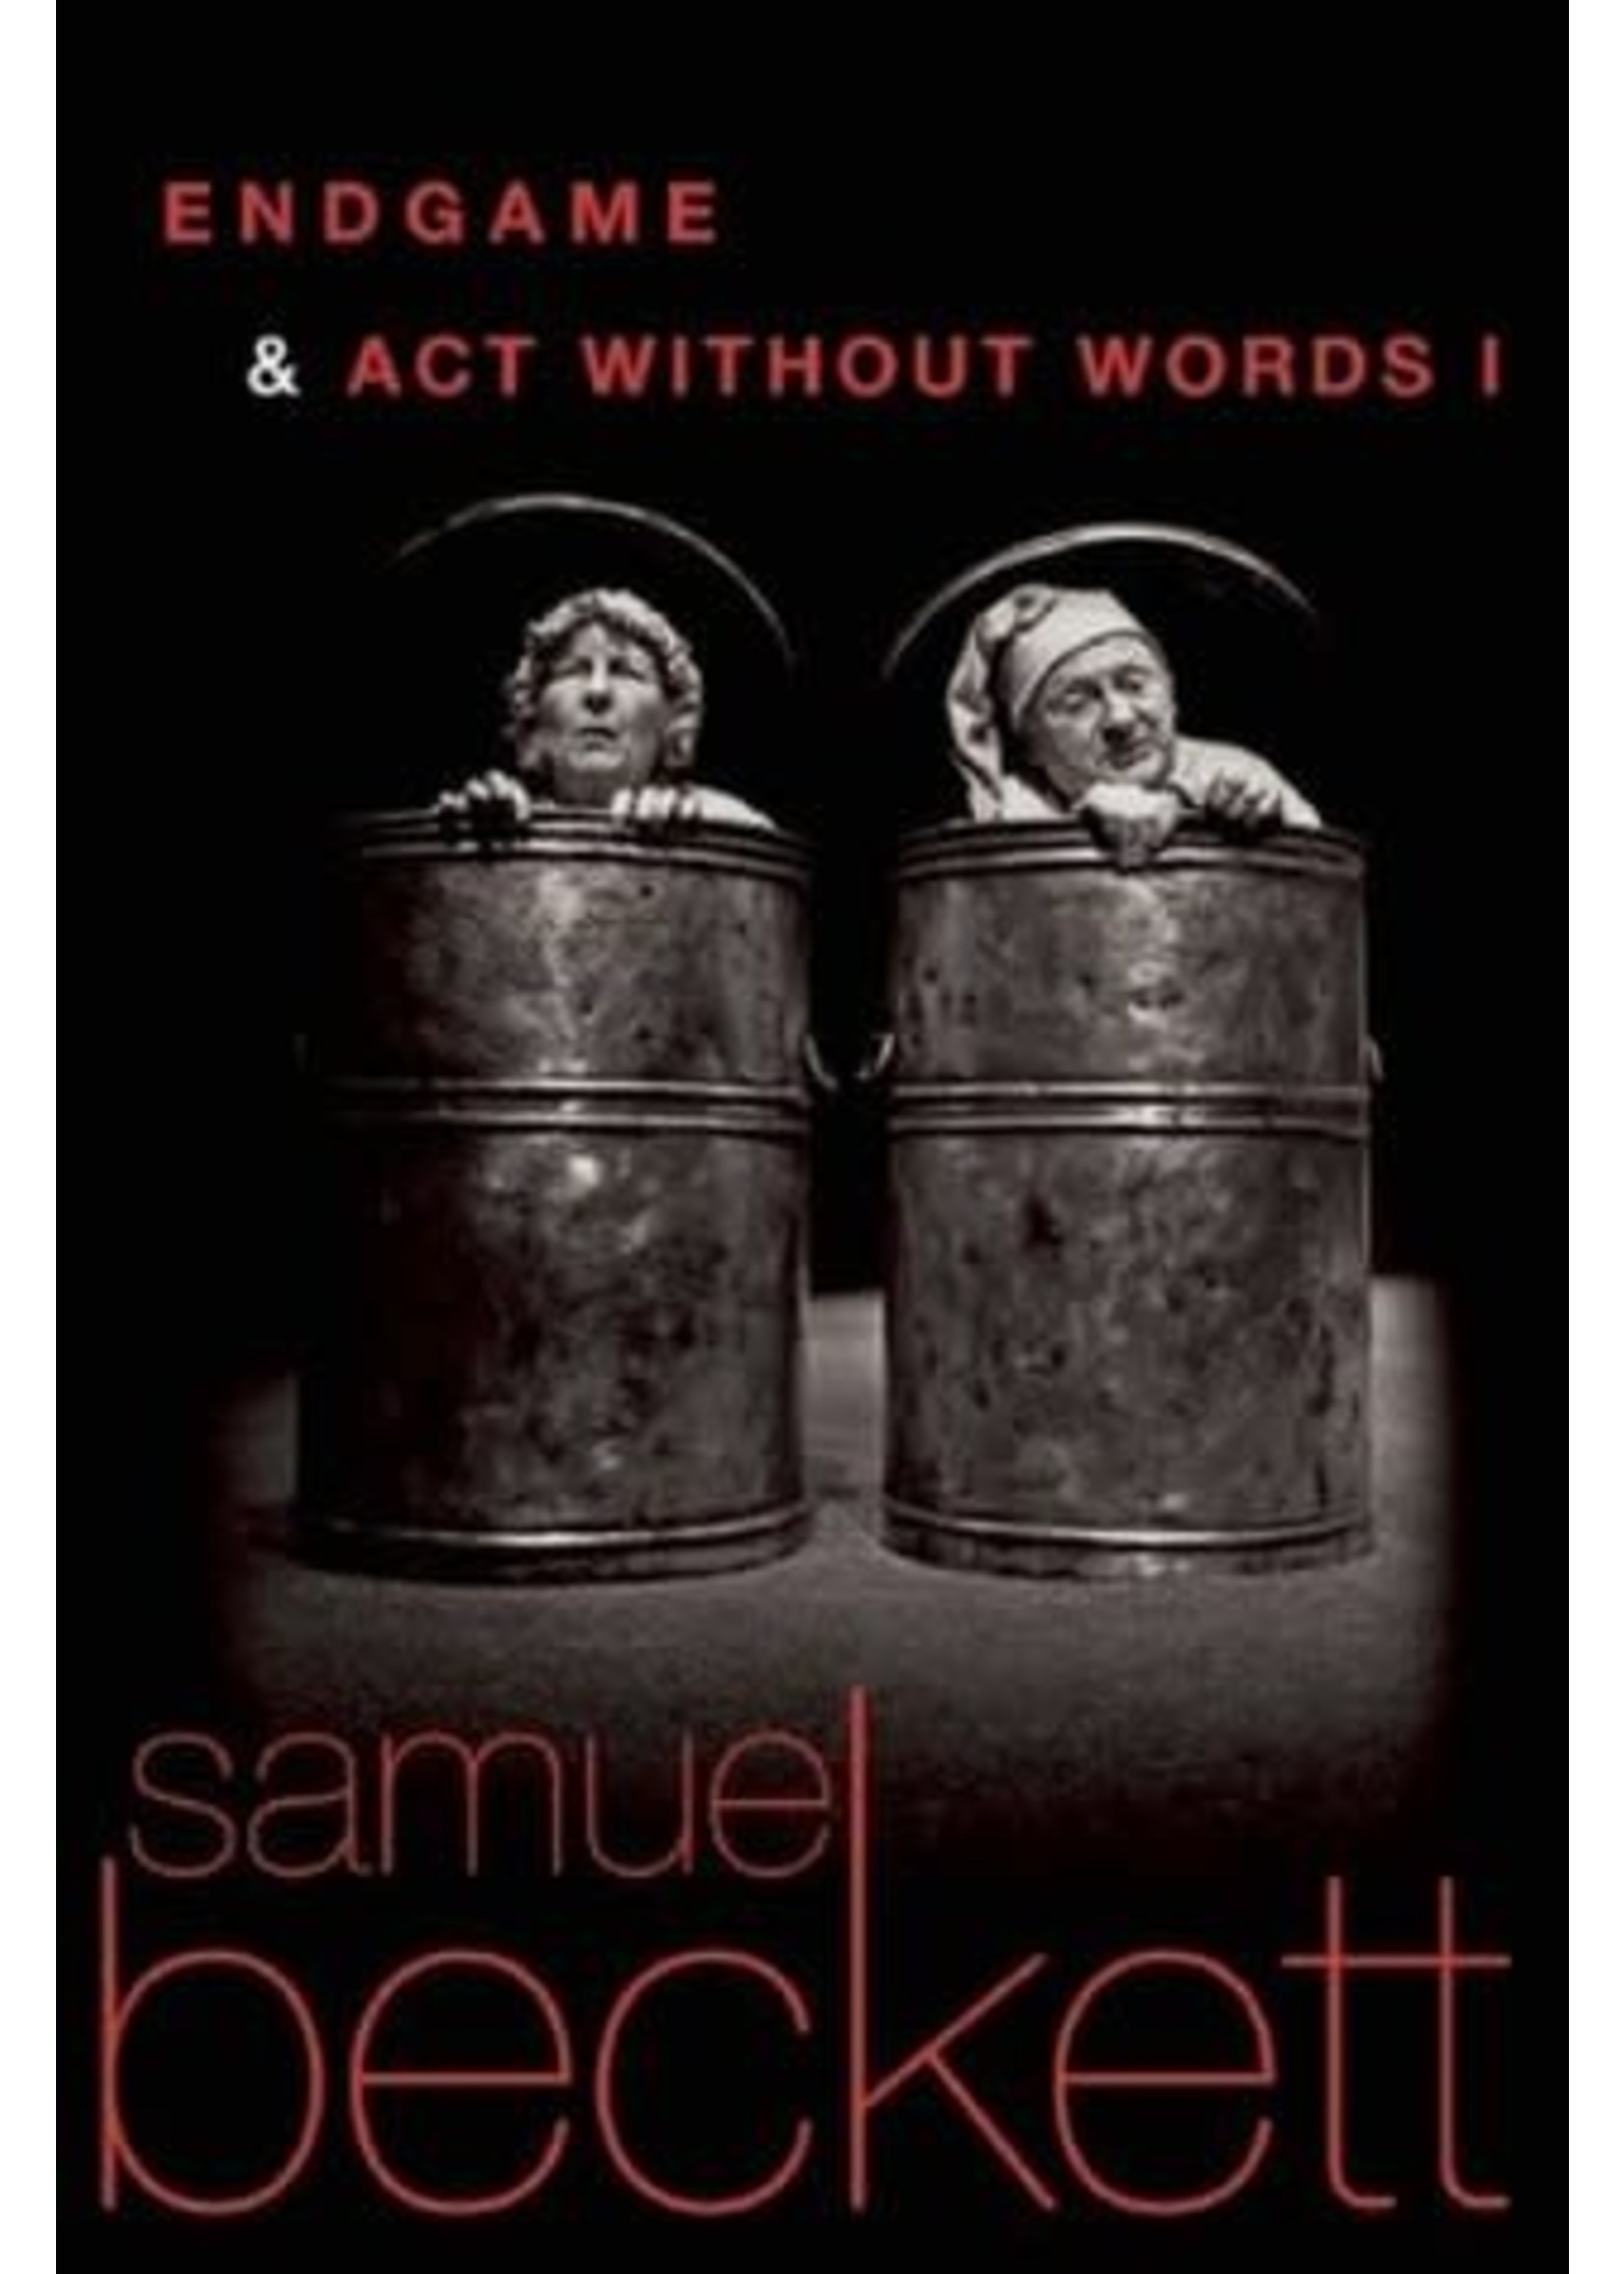 Endgame & Act Without Words I by Samuel Beckett